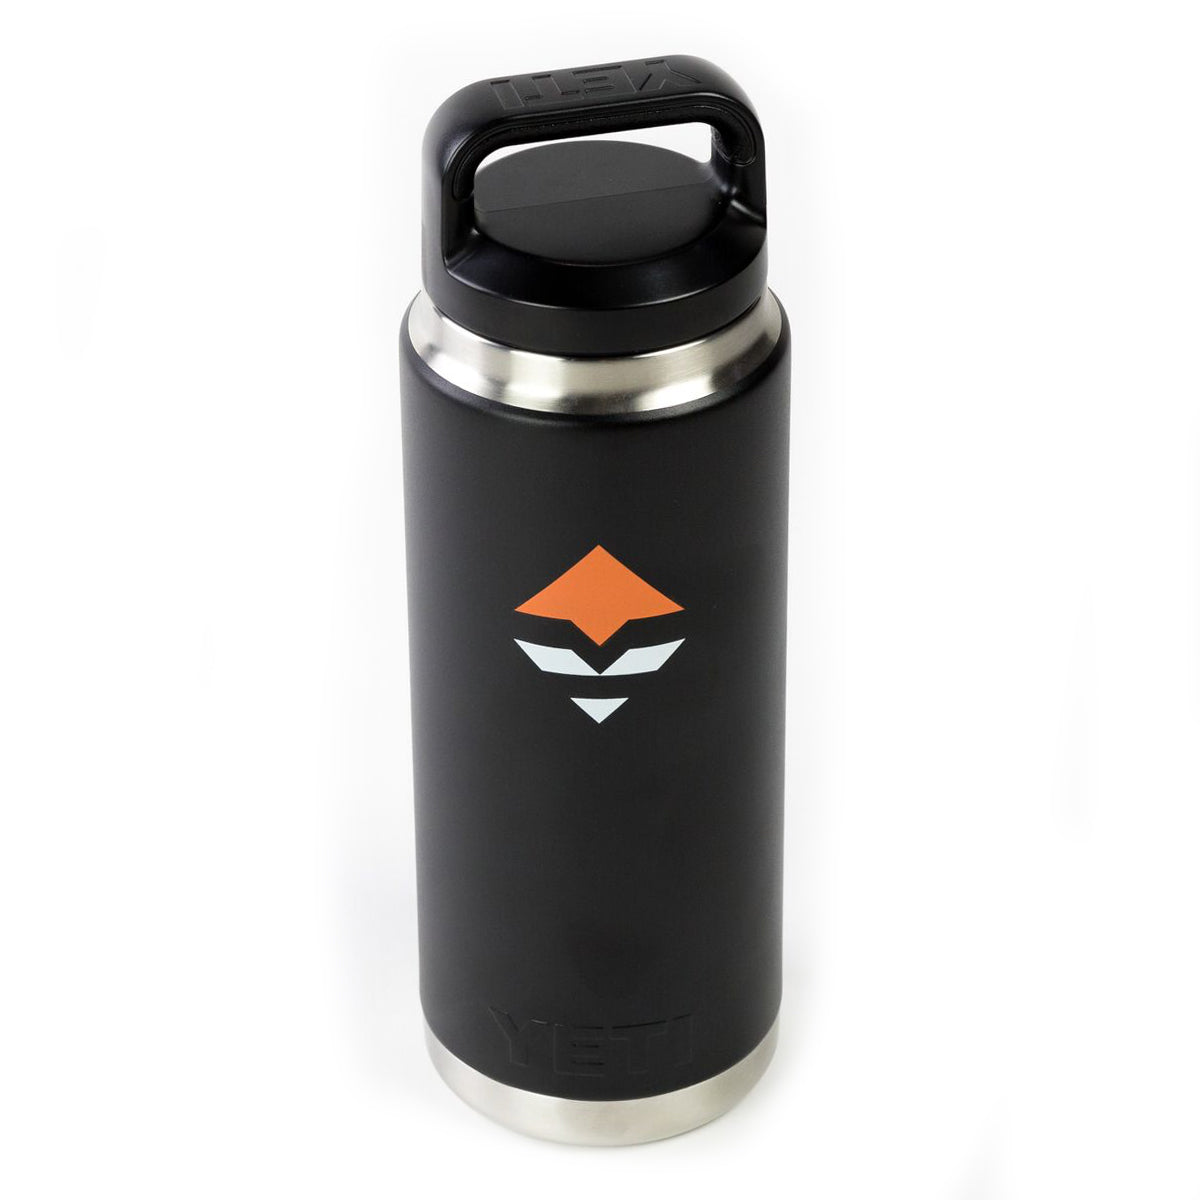 YETI Rambler 26 oz Bottle in YETI Rambler 26 oz Bottle by YETI | Camping - goHUNT Shop by GOHUNT | YETI - GOHUNT Shop